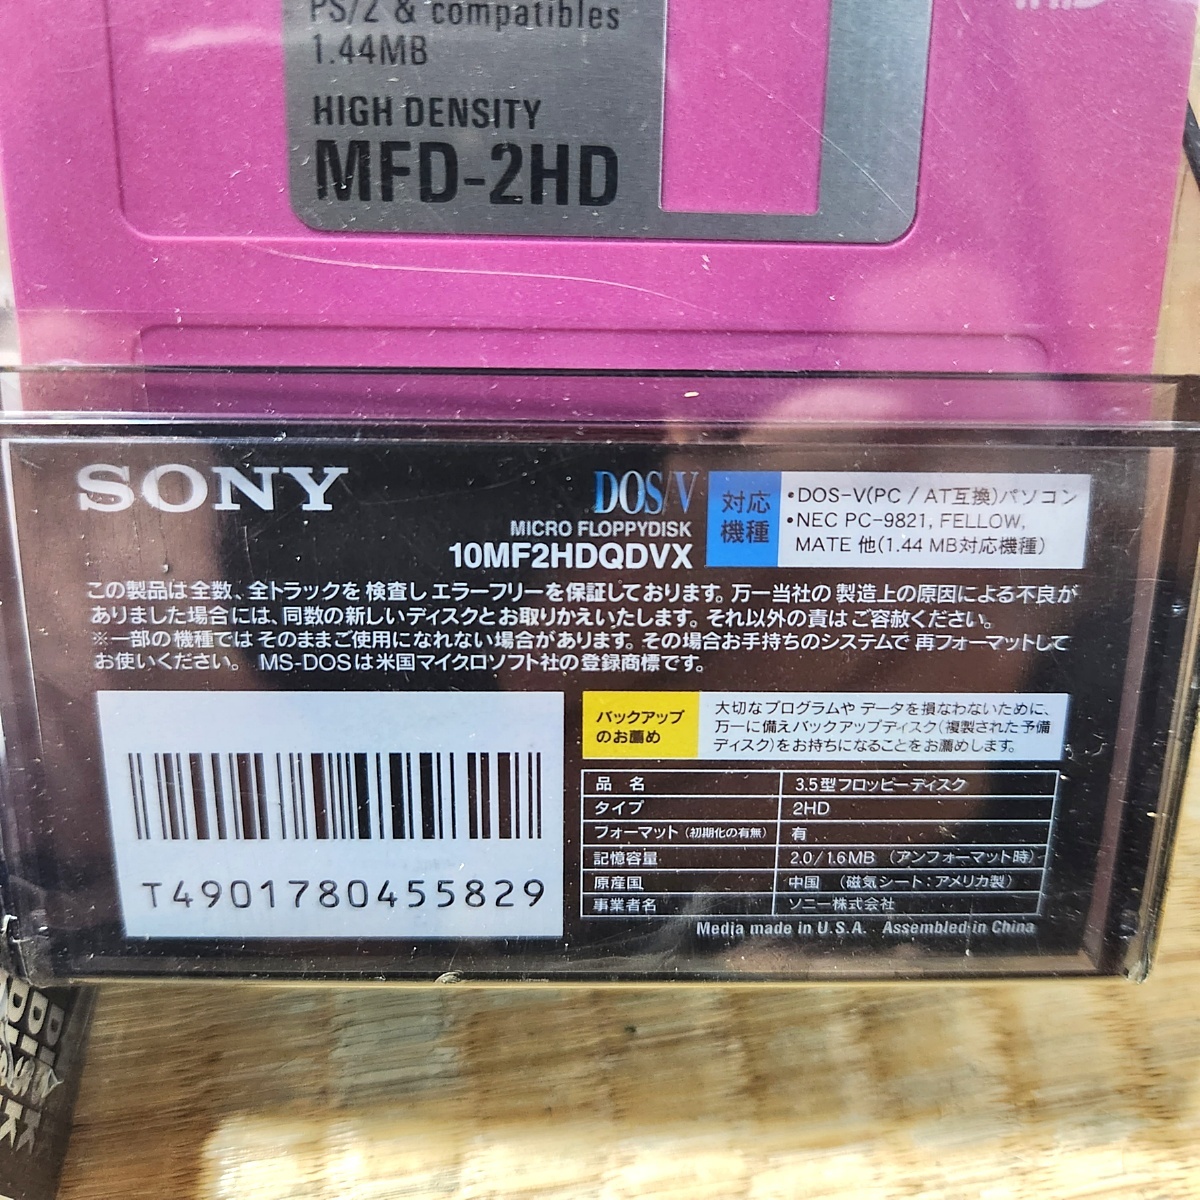  unopened 3.5 -inch floppy disk FD Sony DOS/V NBS Ricoh 60s24-1228